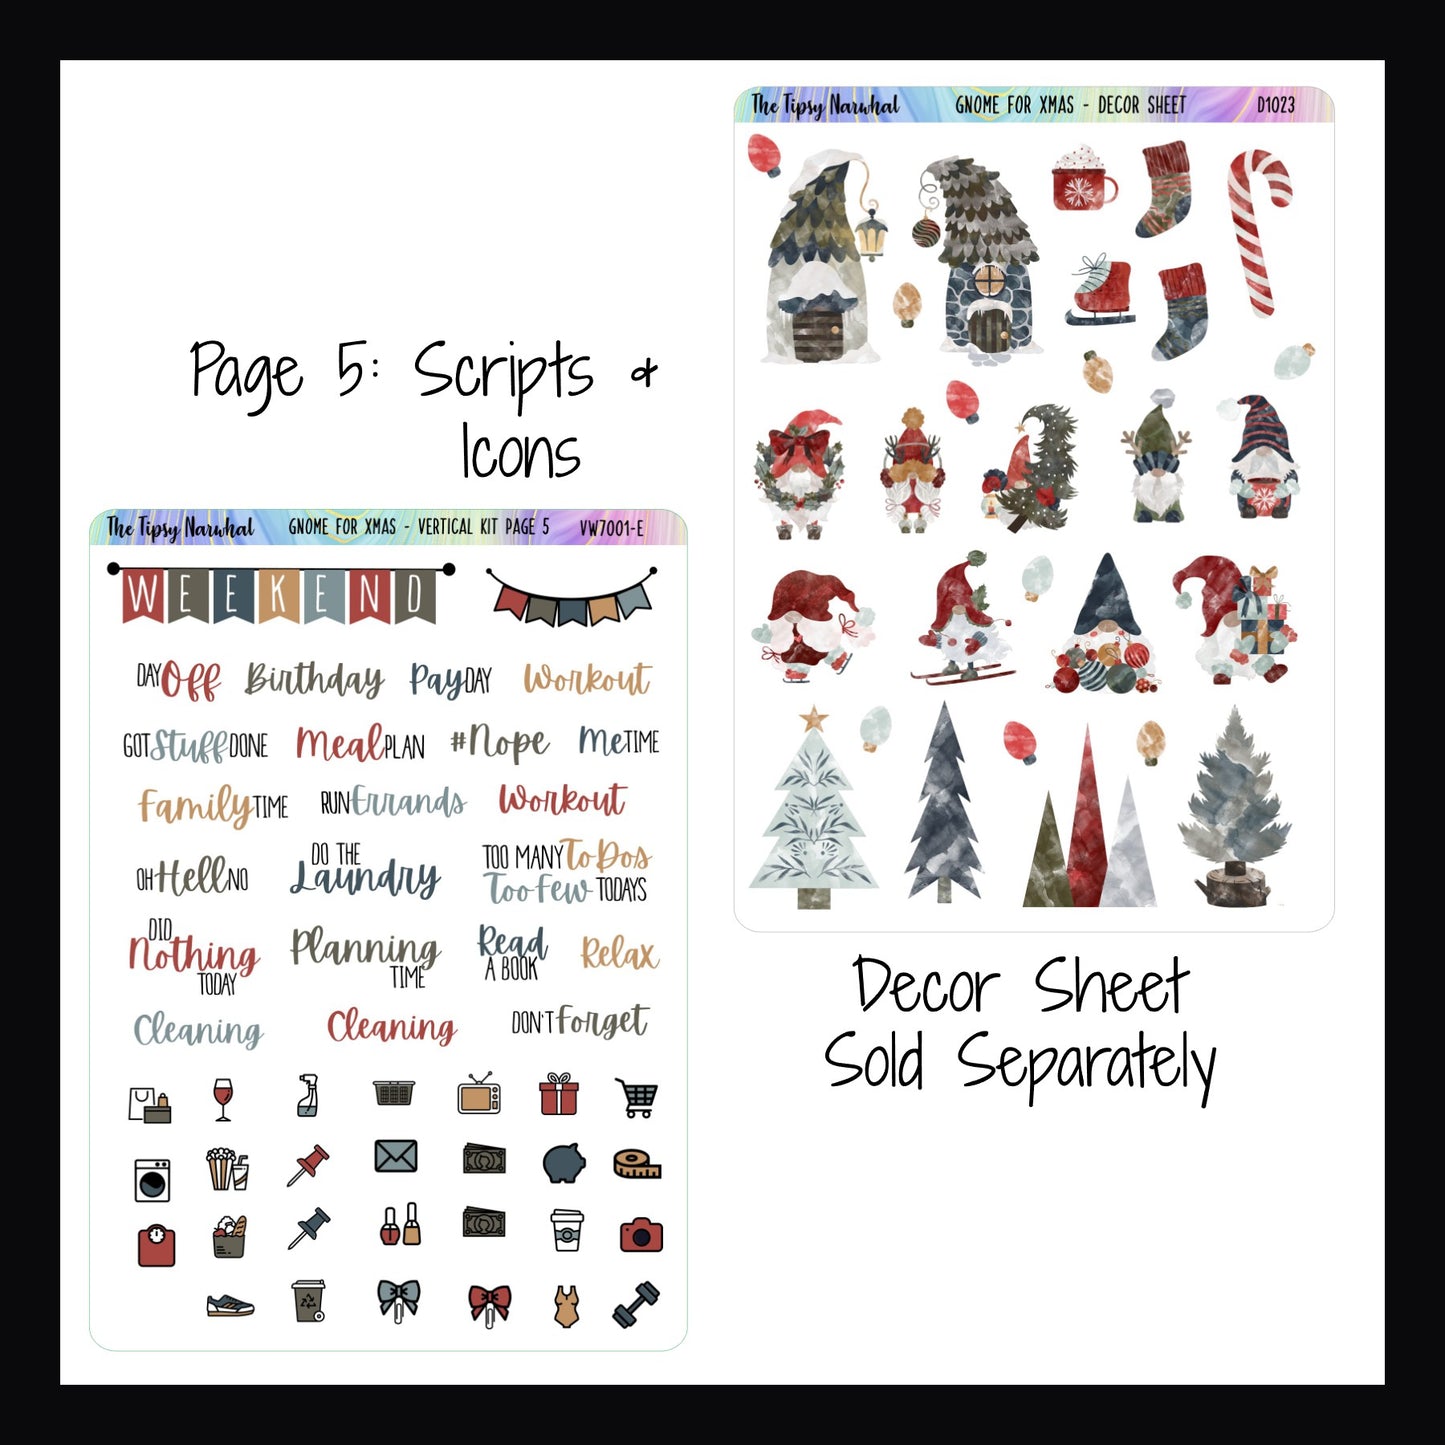 Gnome for Xmas Vertical Weekly Kit Page 5 and Decor Sheet sold separately.  Page 5 features a weekend banner, various script stickers and daily icon stickers.  The decor sheet features multiple gnome stickers, tree stickers, gnome house stickers and holiday accessories including skates, stockings, hot chocolate, candy cane and several light bulbs